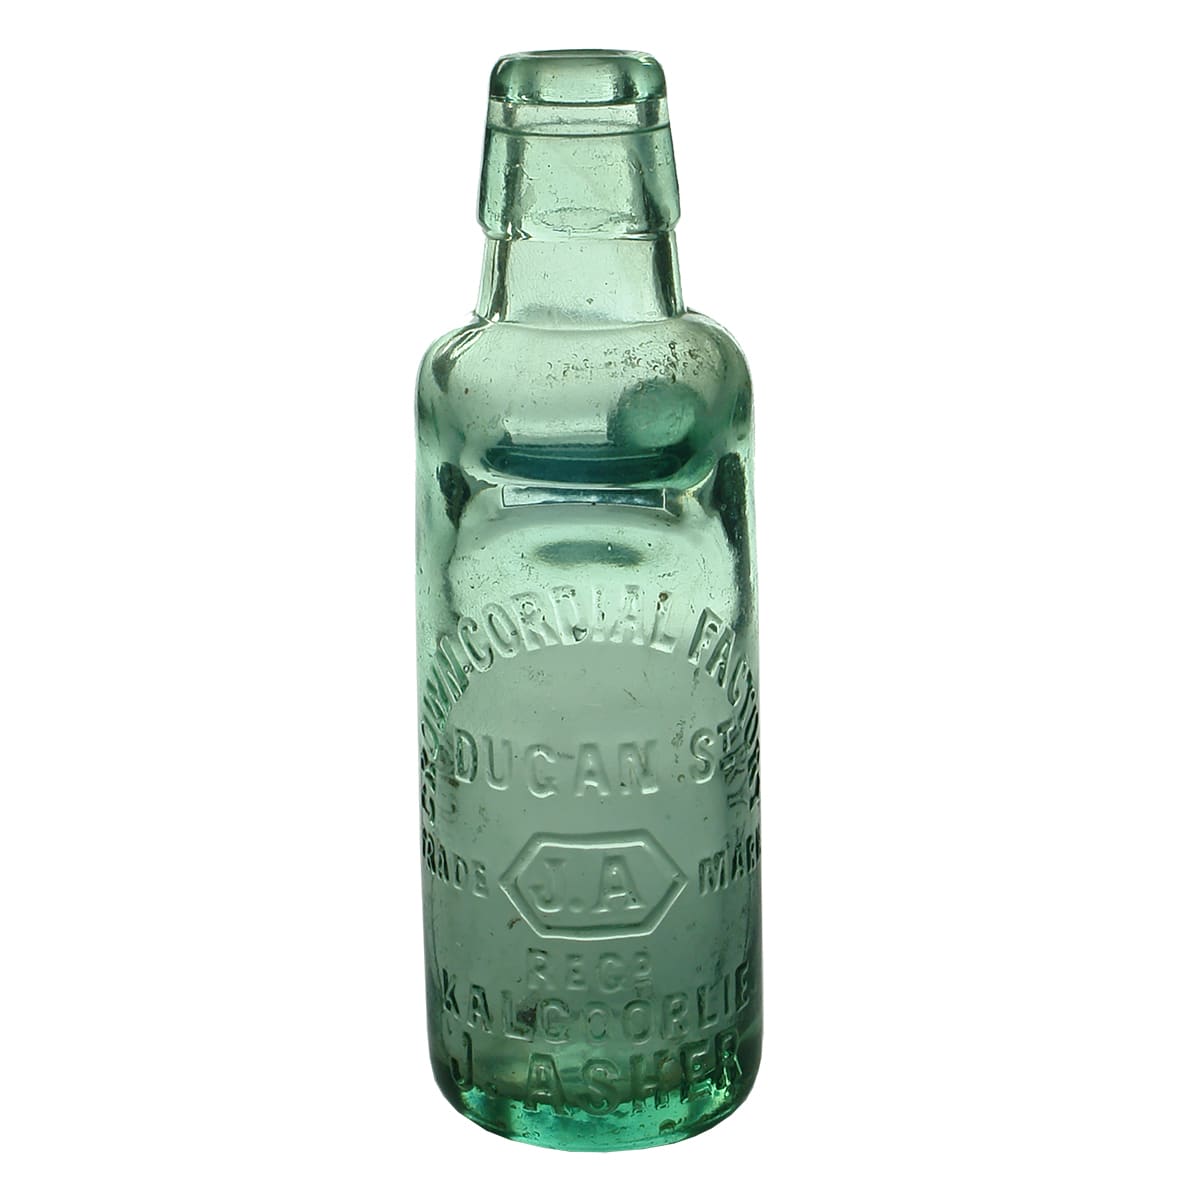 Codd. Crown Cordial Factory, Asher, Kalgoorlie. All Way Pour. 6 oz.